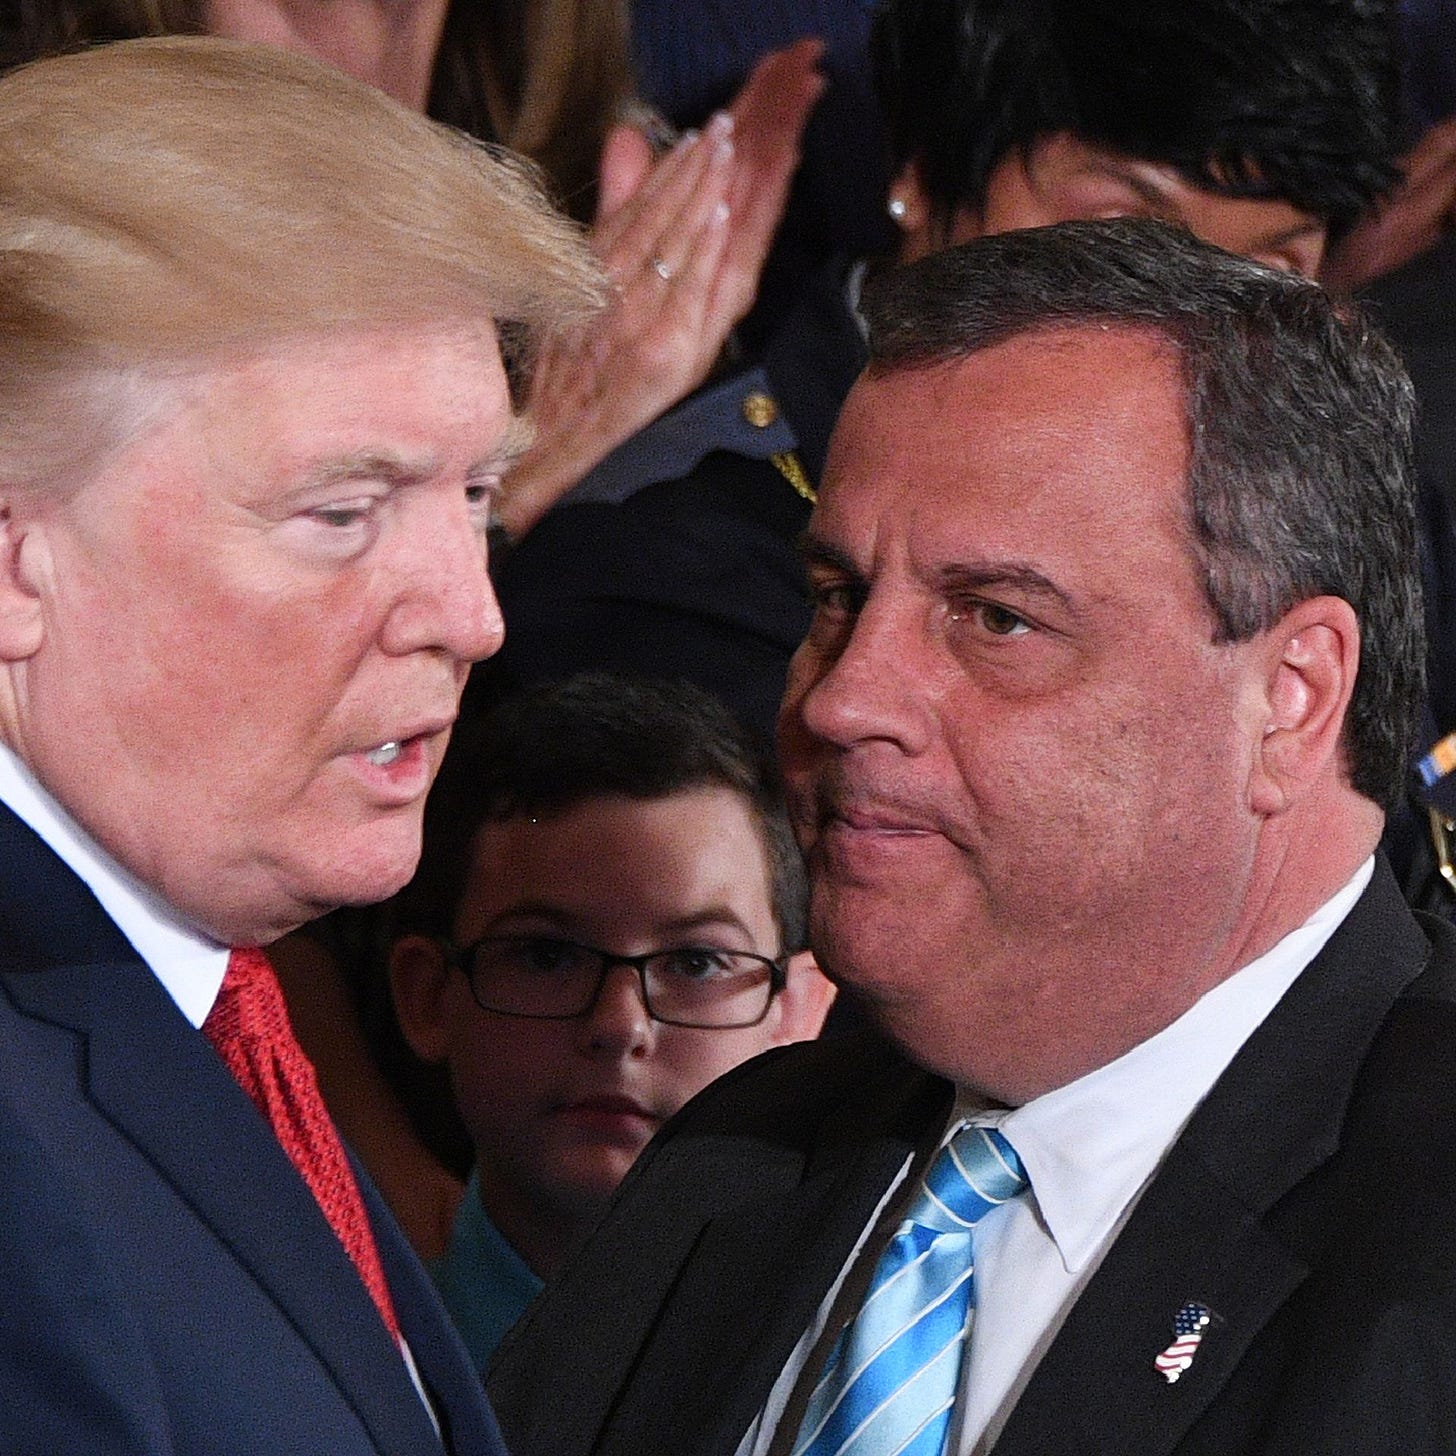 Christie vows never to support Trump again